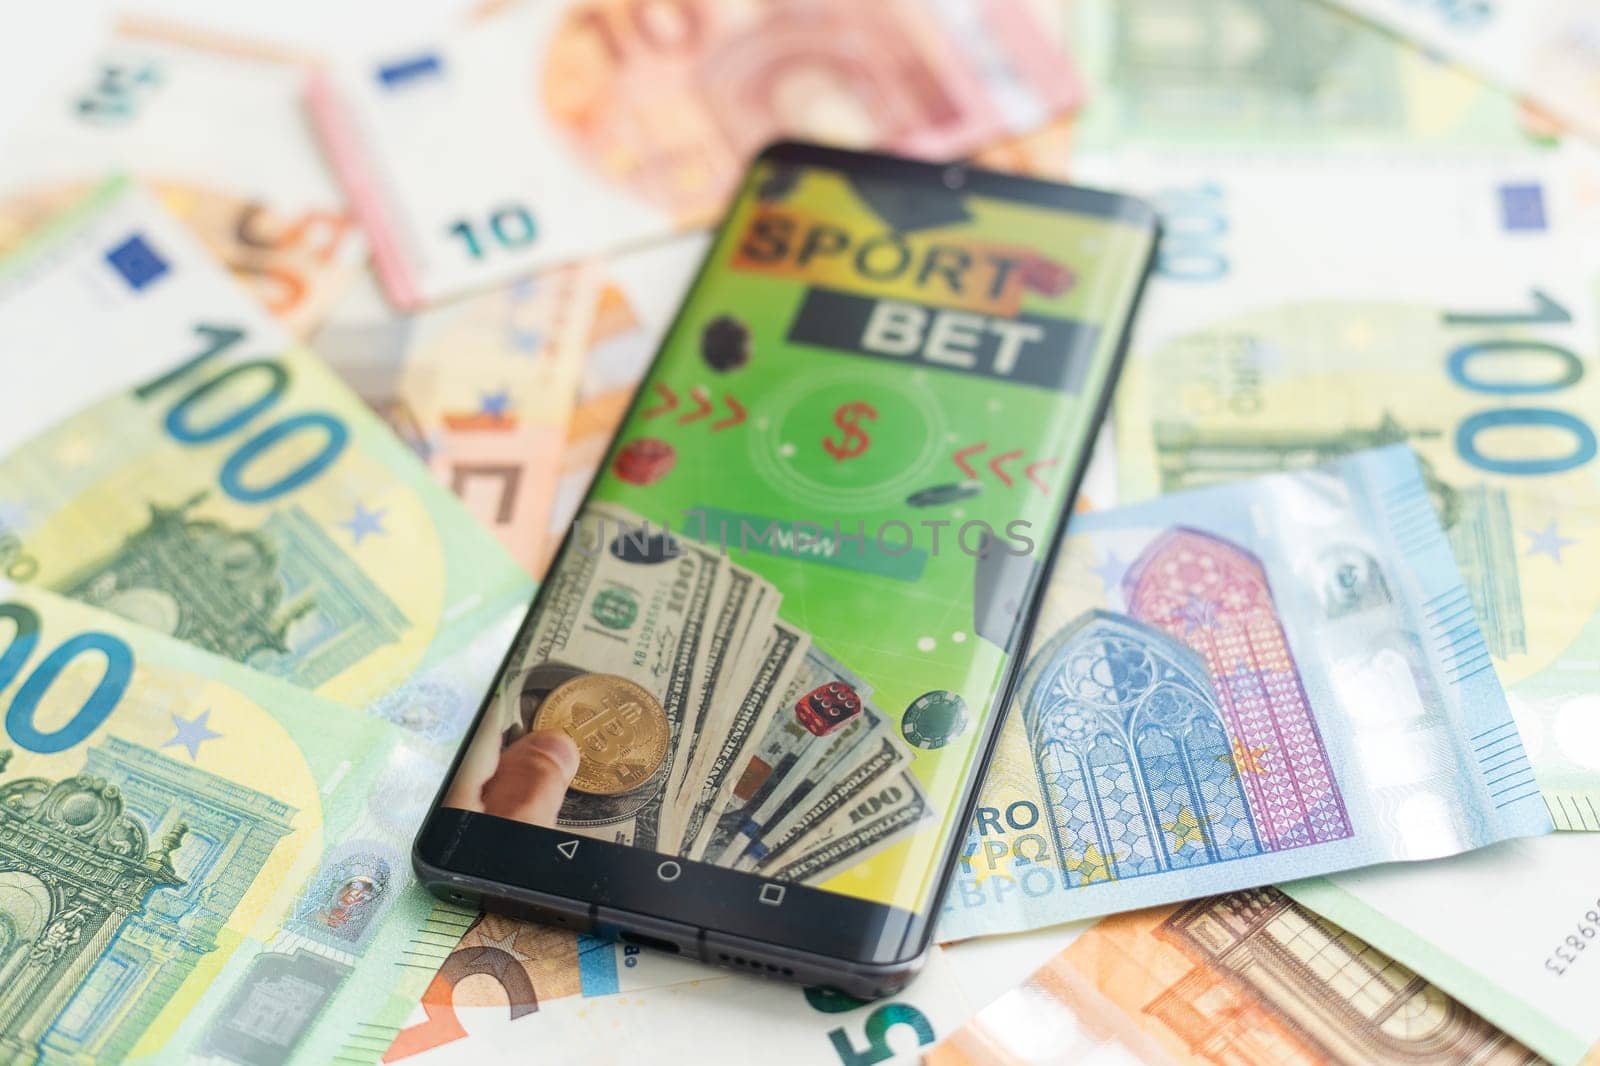 Sports betting website in a mobile phone screen, money. High quality photo